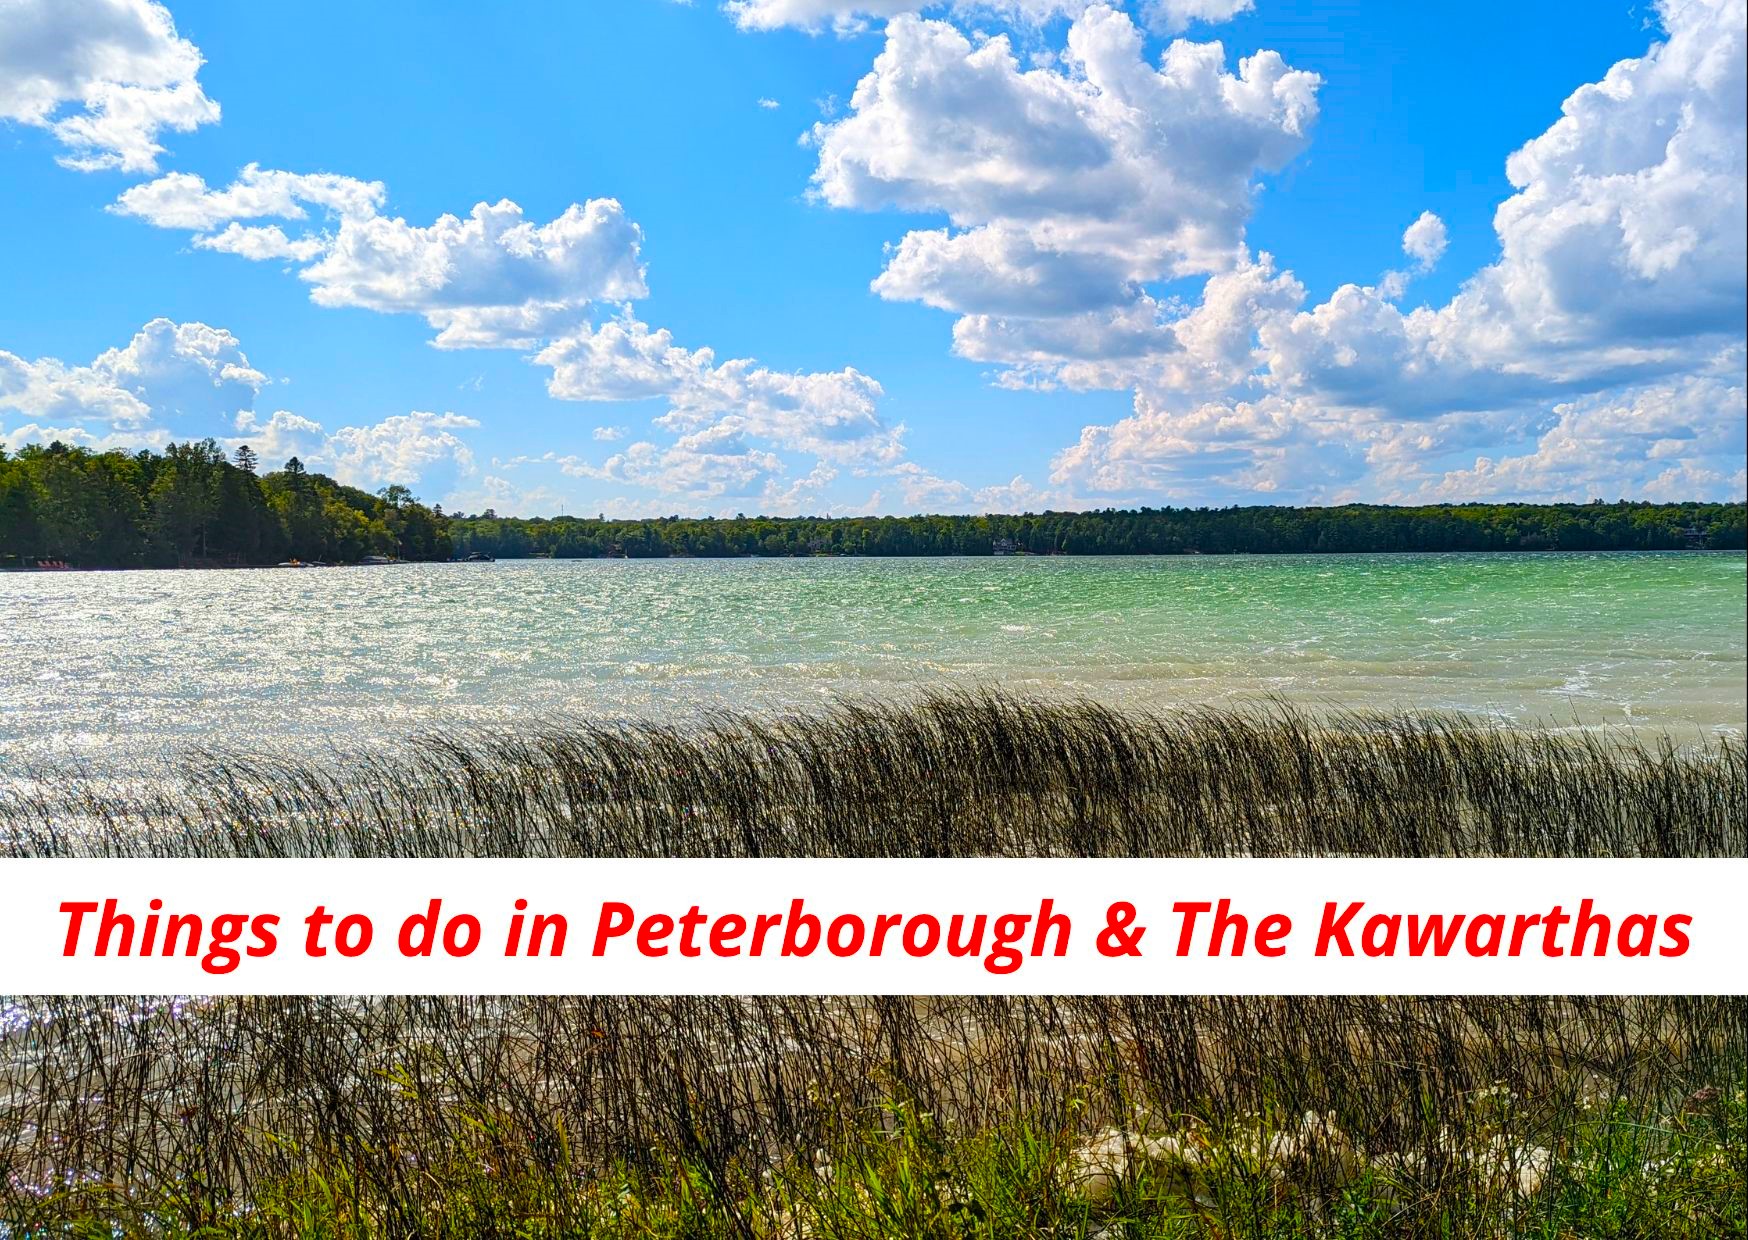 Best things to do in Peterborough and the Kawarthas